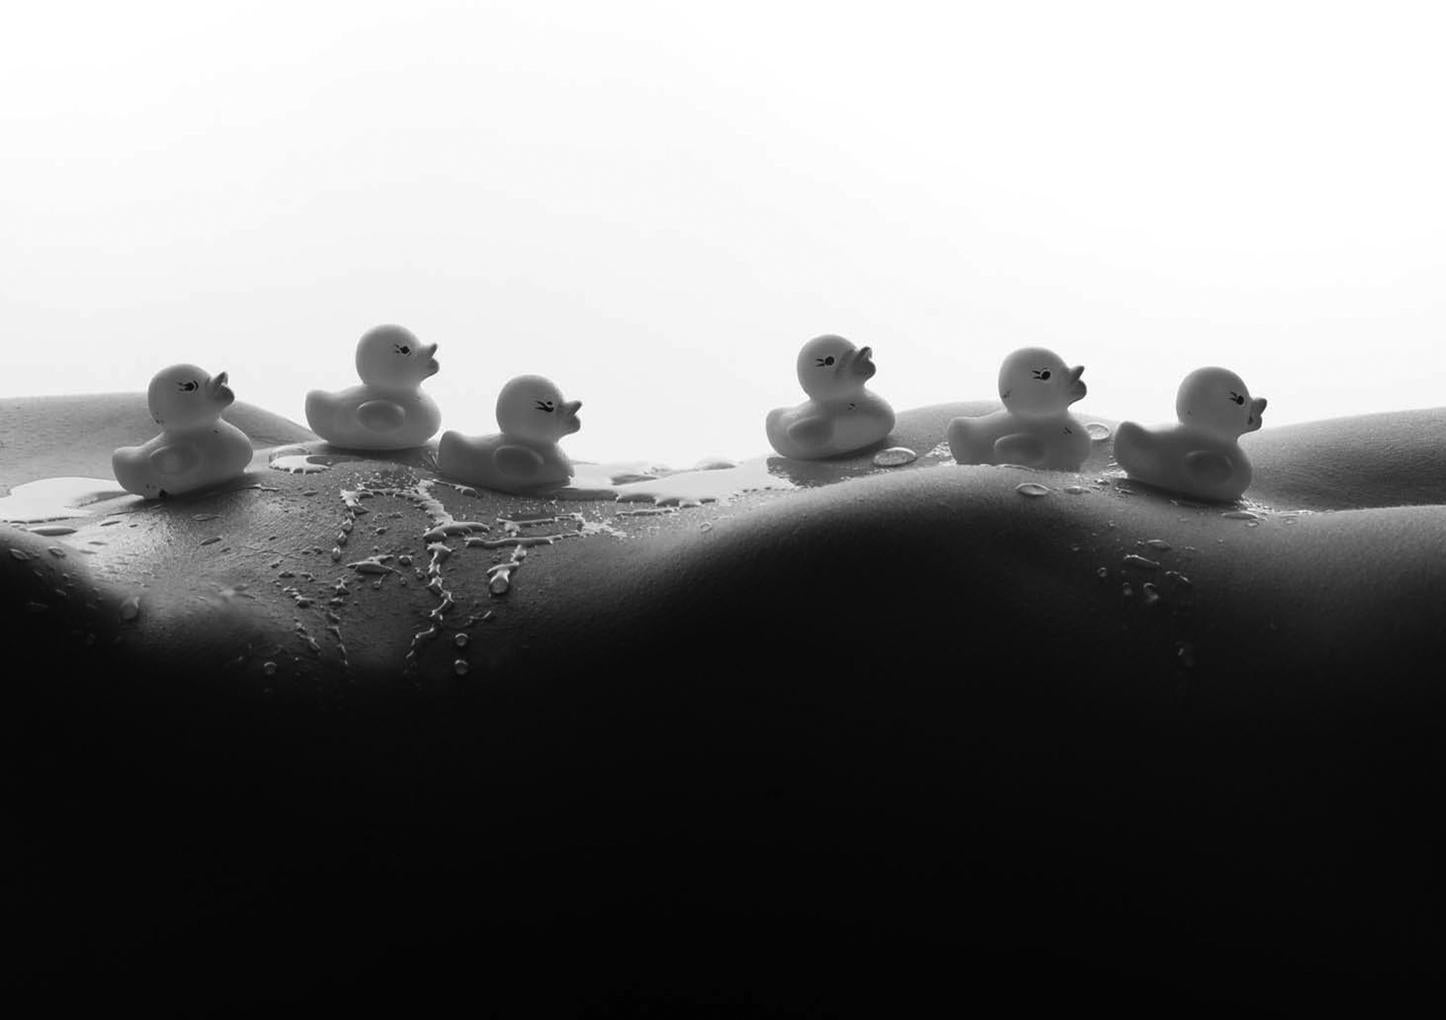 Rubber ducks - black and white photography - Photograph by Allan I. Teger